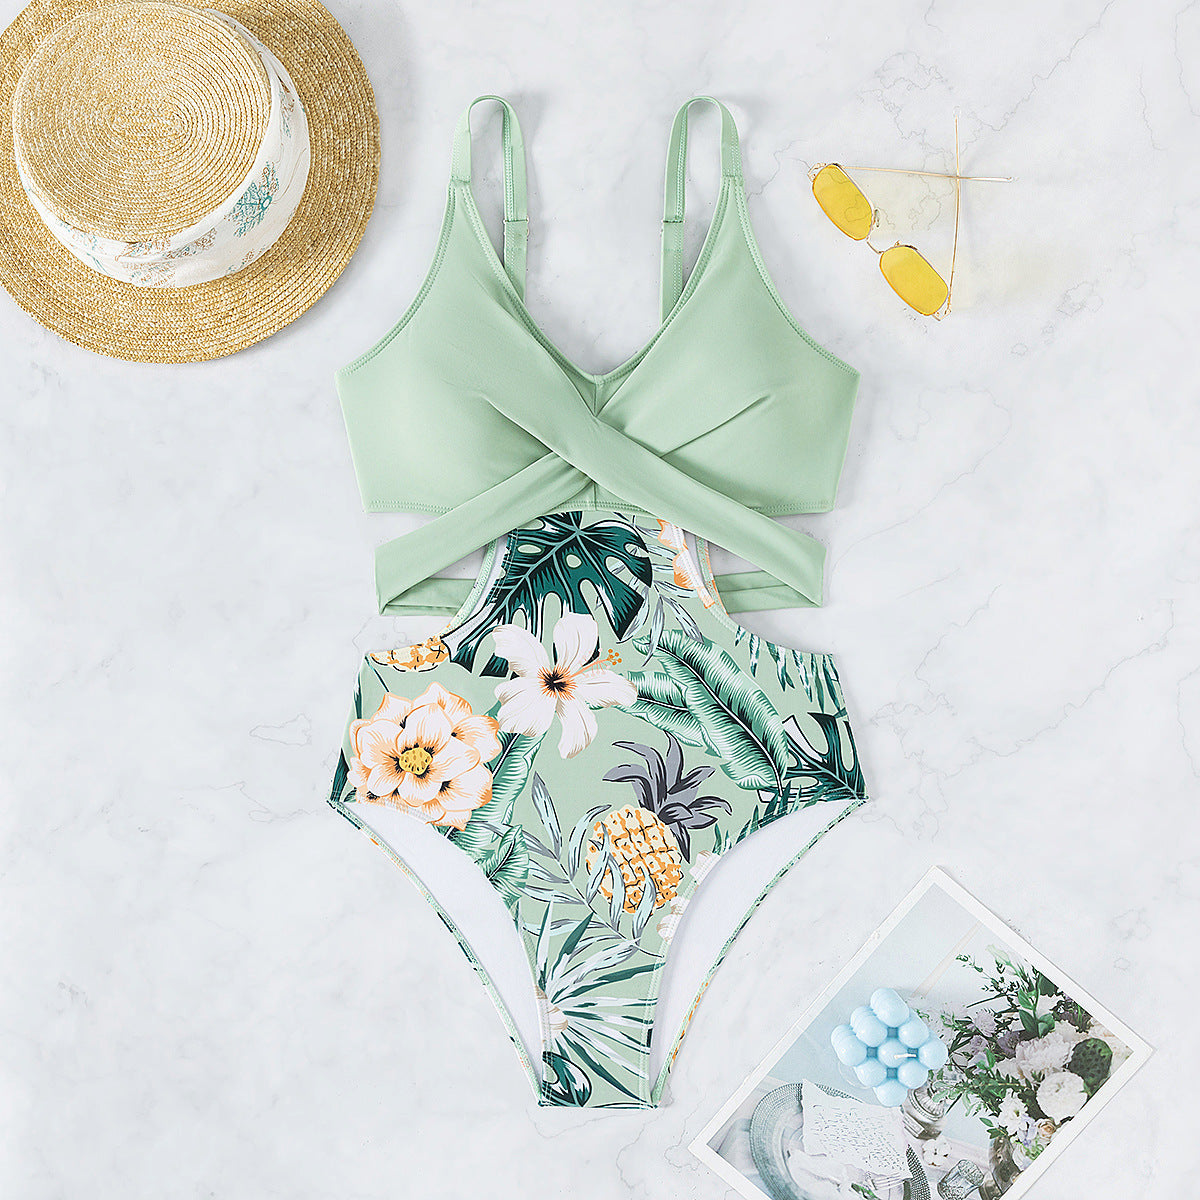 Printed Hollow Out Tied One-piece Bikini